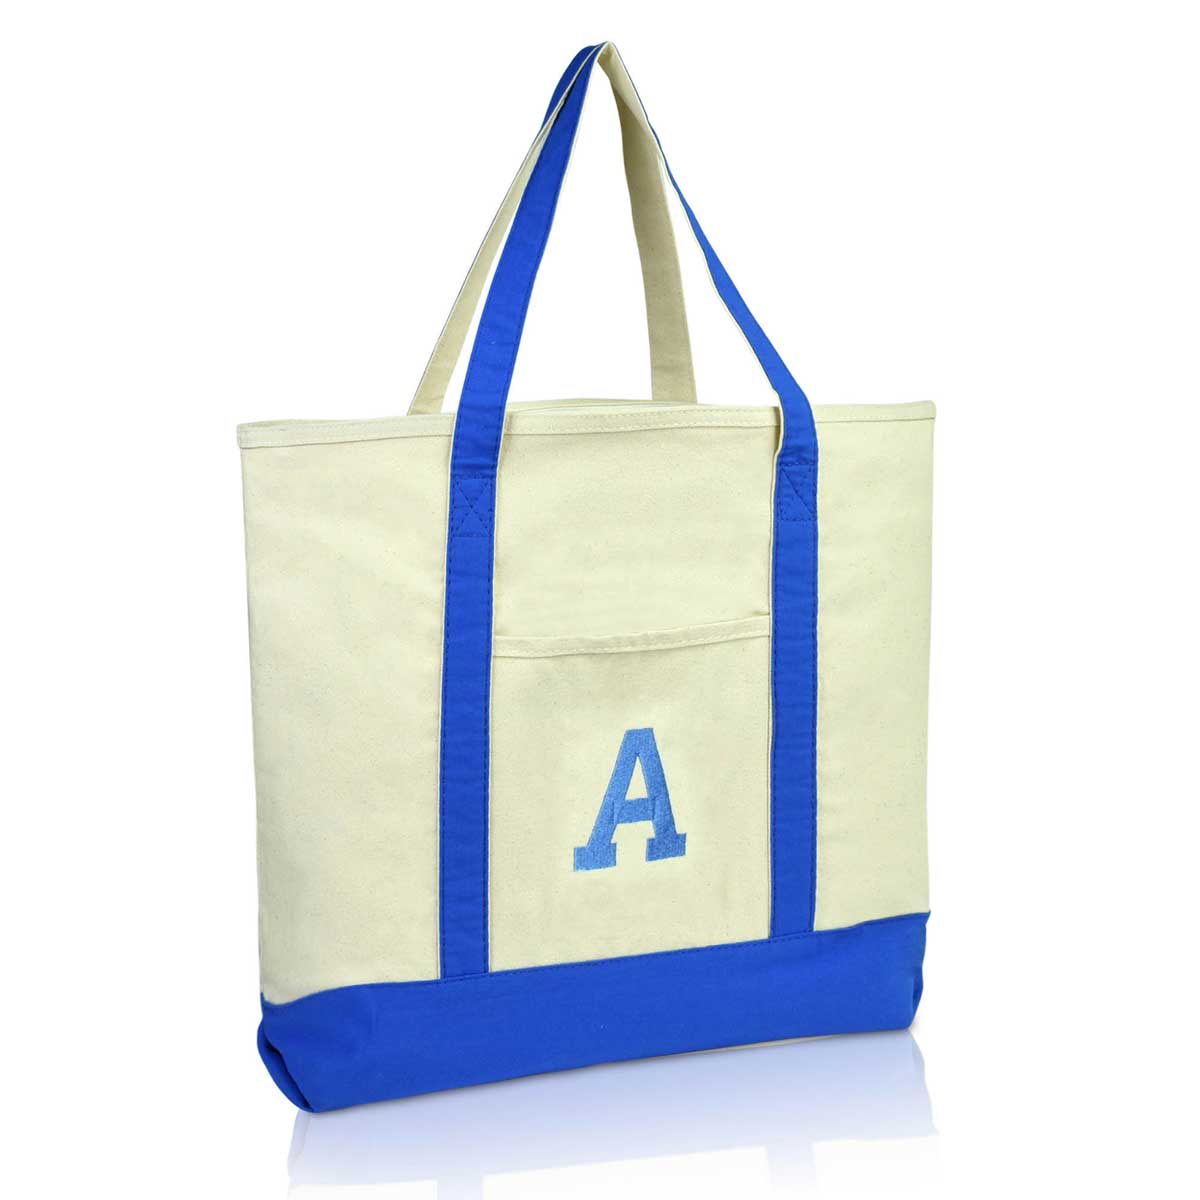 Dalix Initial Tote Bag Personalized Monogram Zippered Top Letter - A